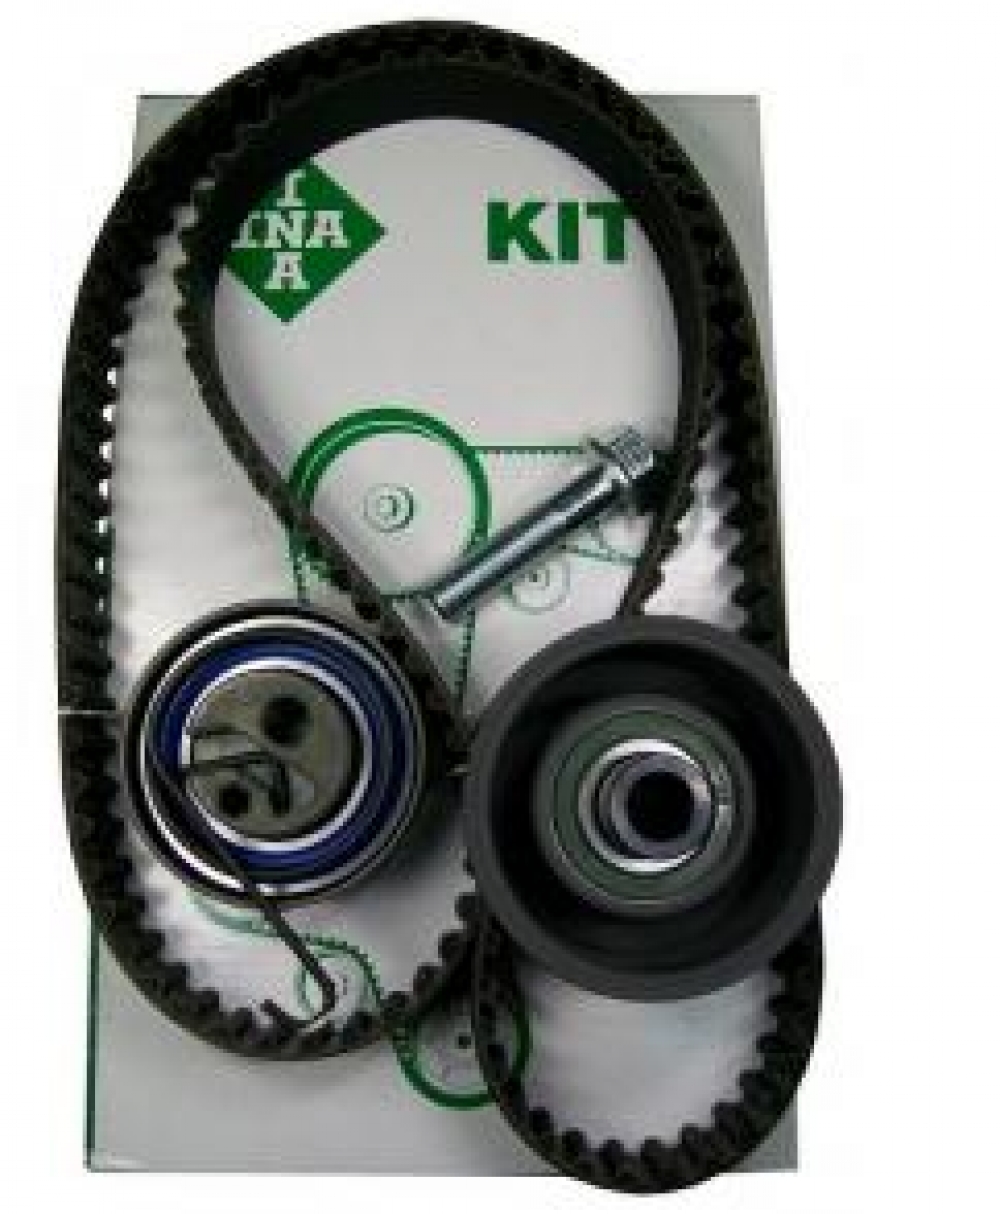 Kit distributie Opel Astra G Y17DT INA Pagina 2/opel-mokka/piese-auto-jeep/piese-auto-jeep - Kit distributie Opel Astra G